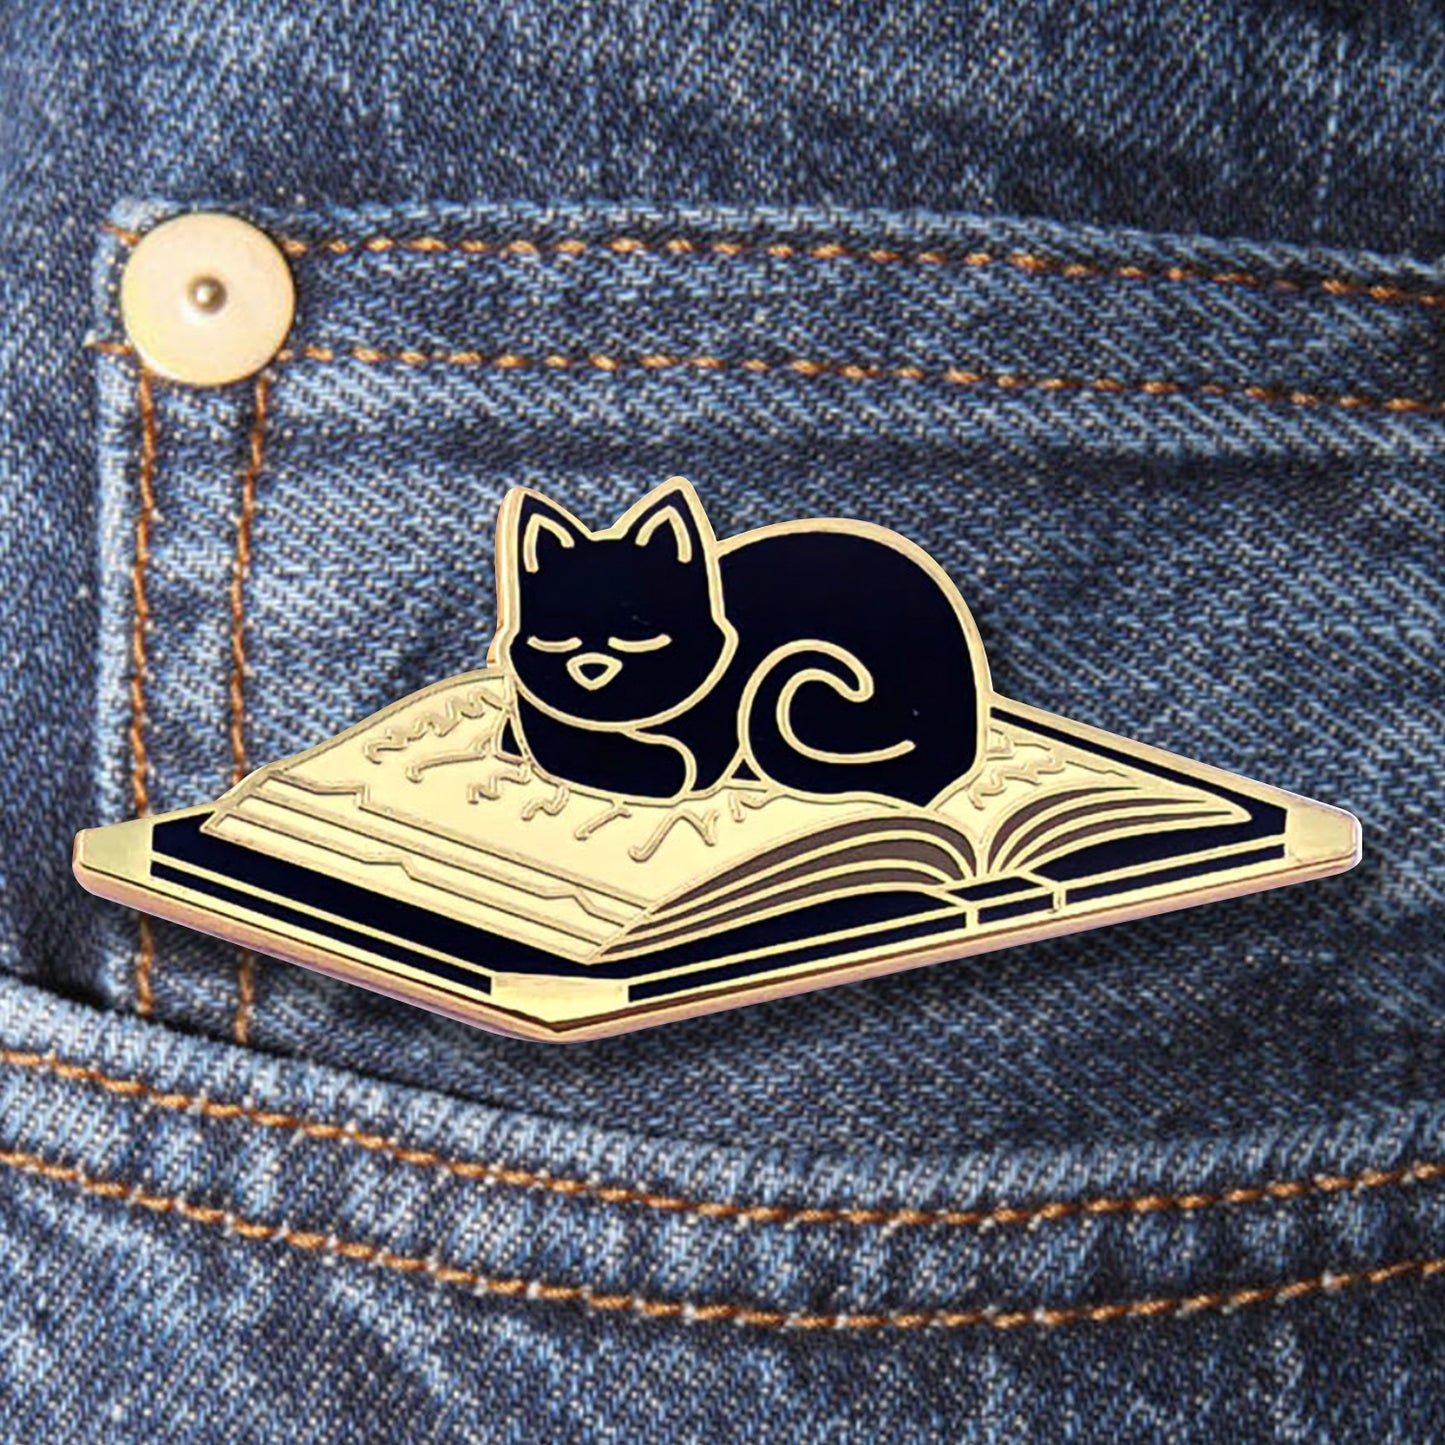 Close up of a gold colored enamel pin on a denim pocket. The pin is shaped like an open book with a black cat sleeping on the pages.